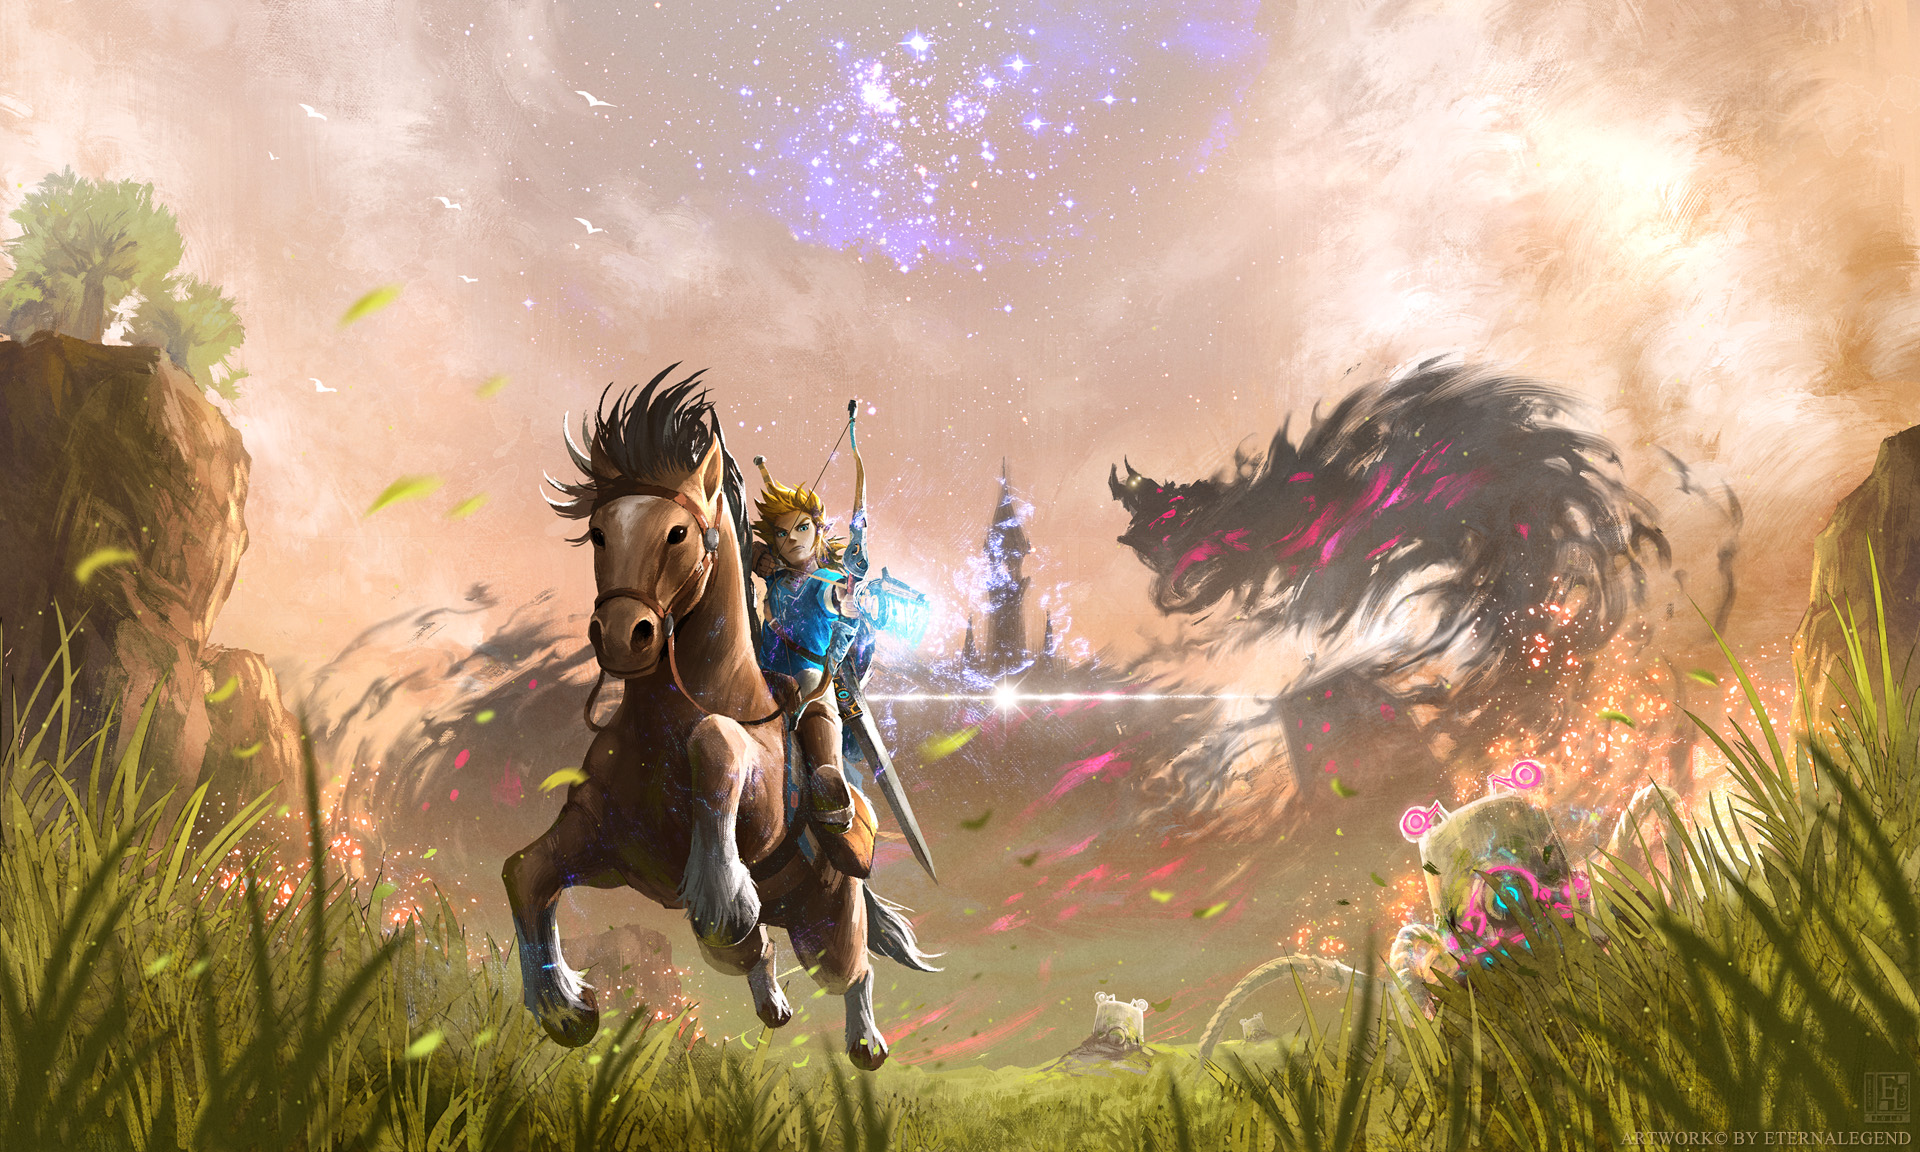 legend of zelda breath of the wild wallpaper,cg artwork,action adventure game,screenshot,strategy video game,fictional character